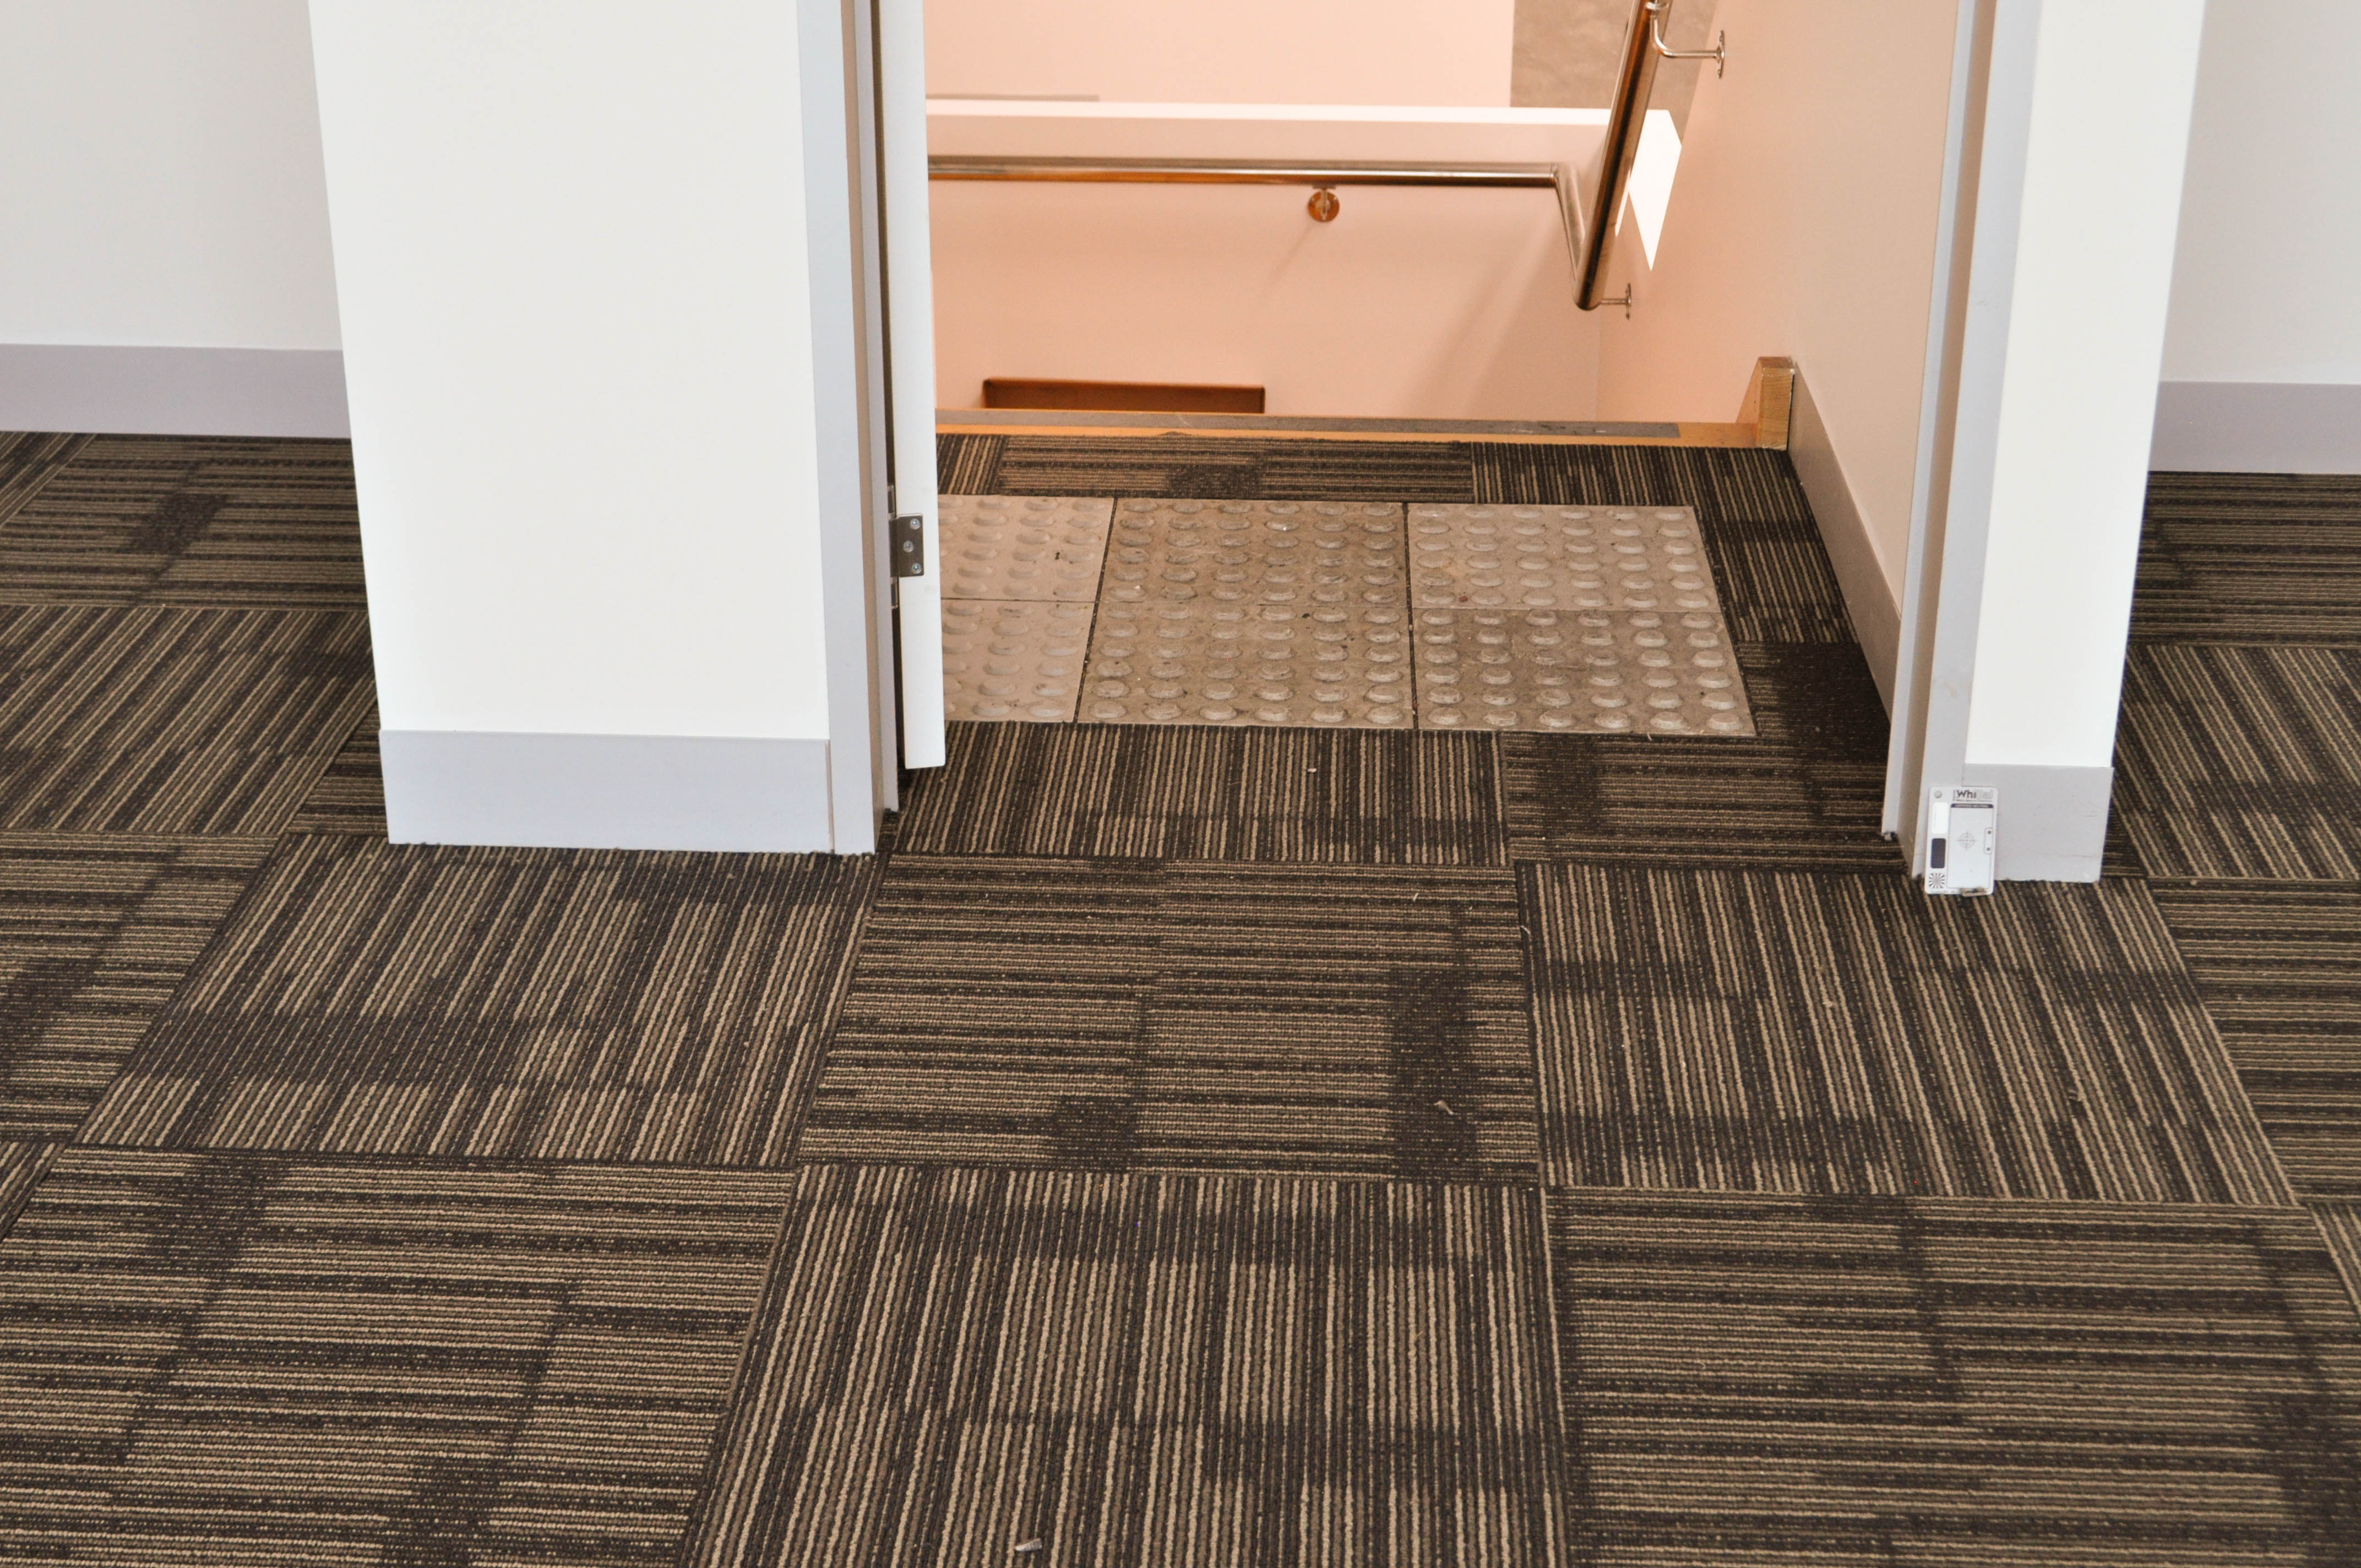 patterned, brown colored, square carpet tiles sold and installed by Concord Floors in a commercial property in 
Derrimut.